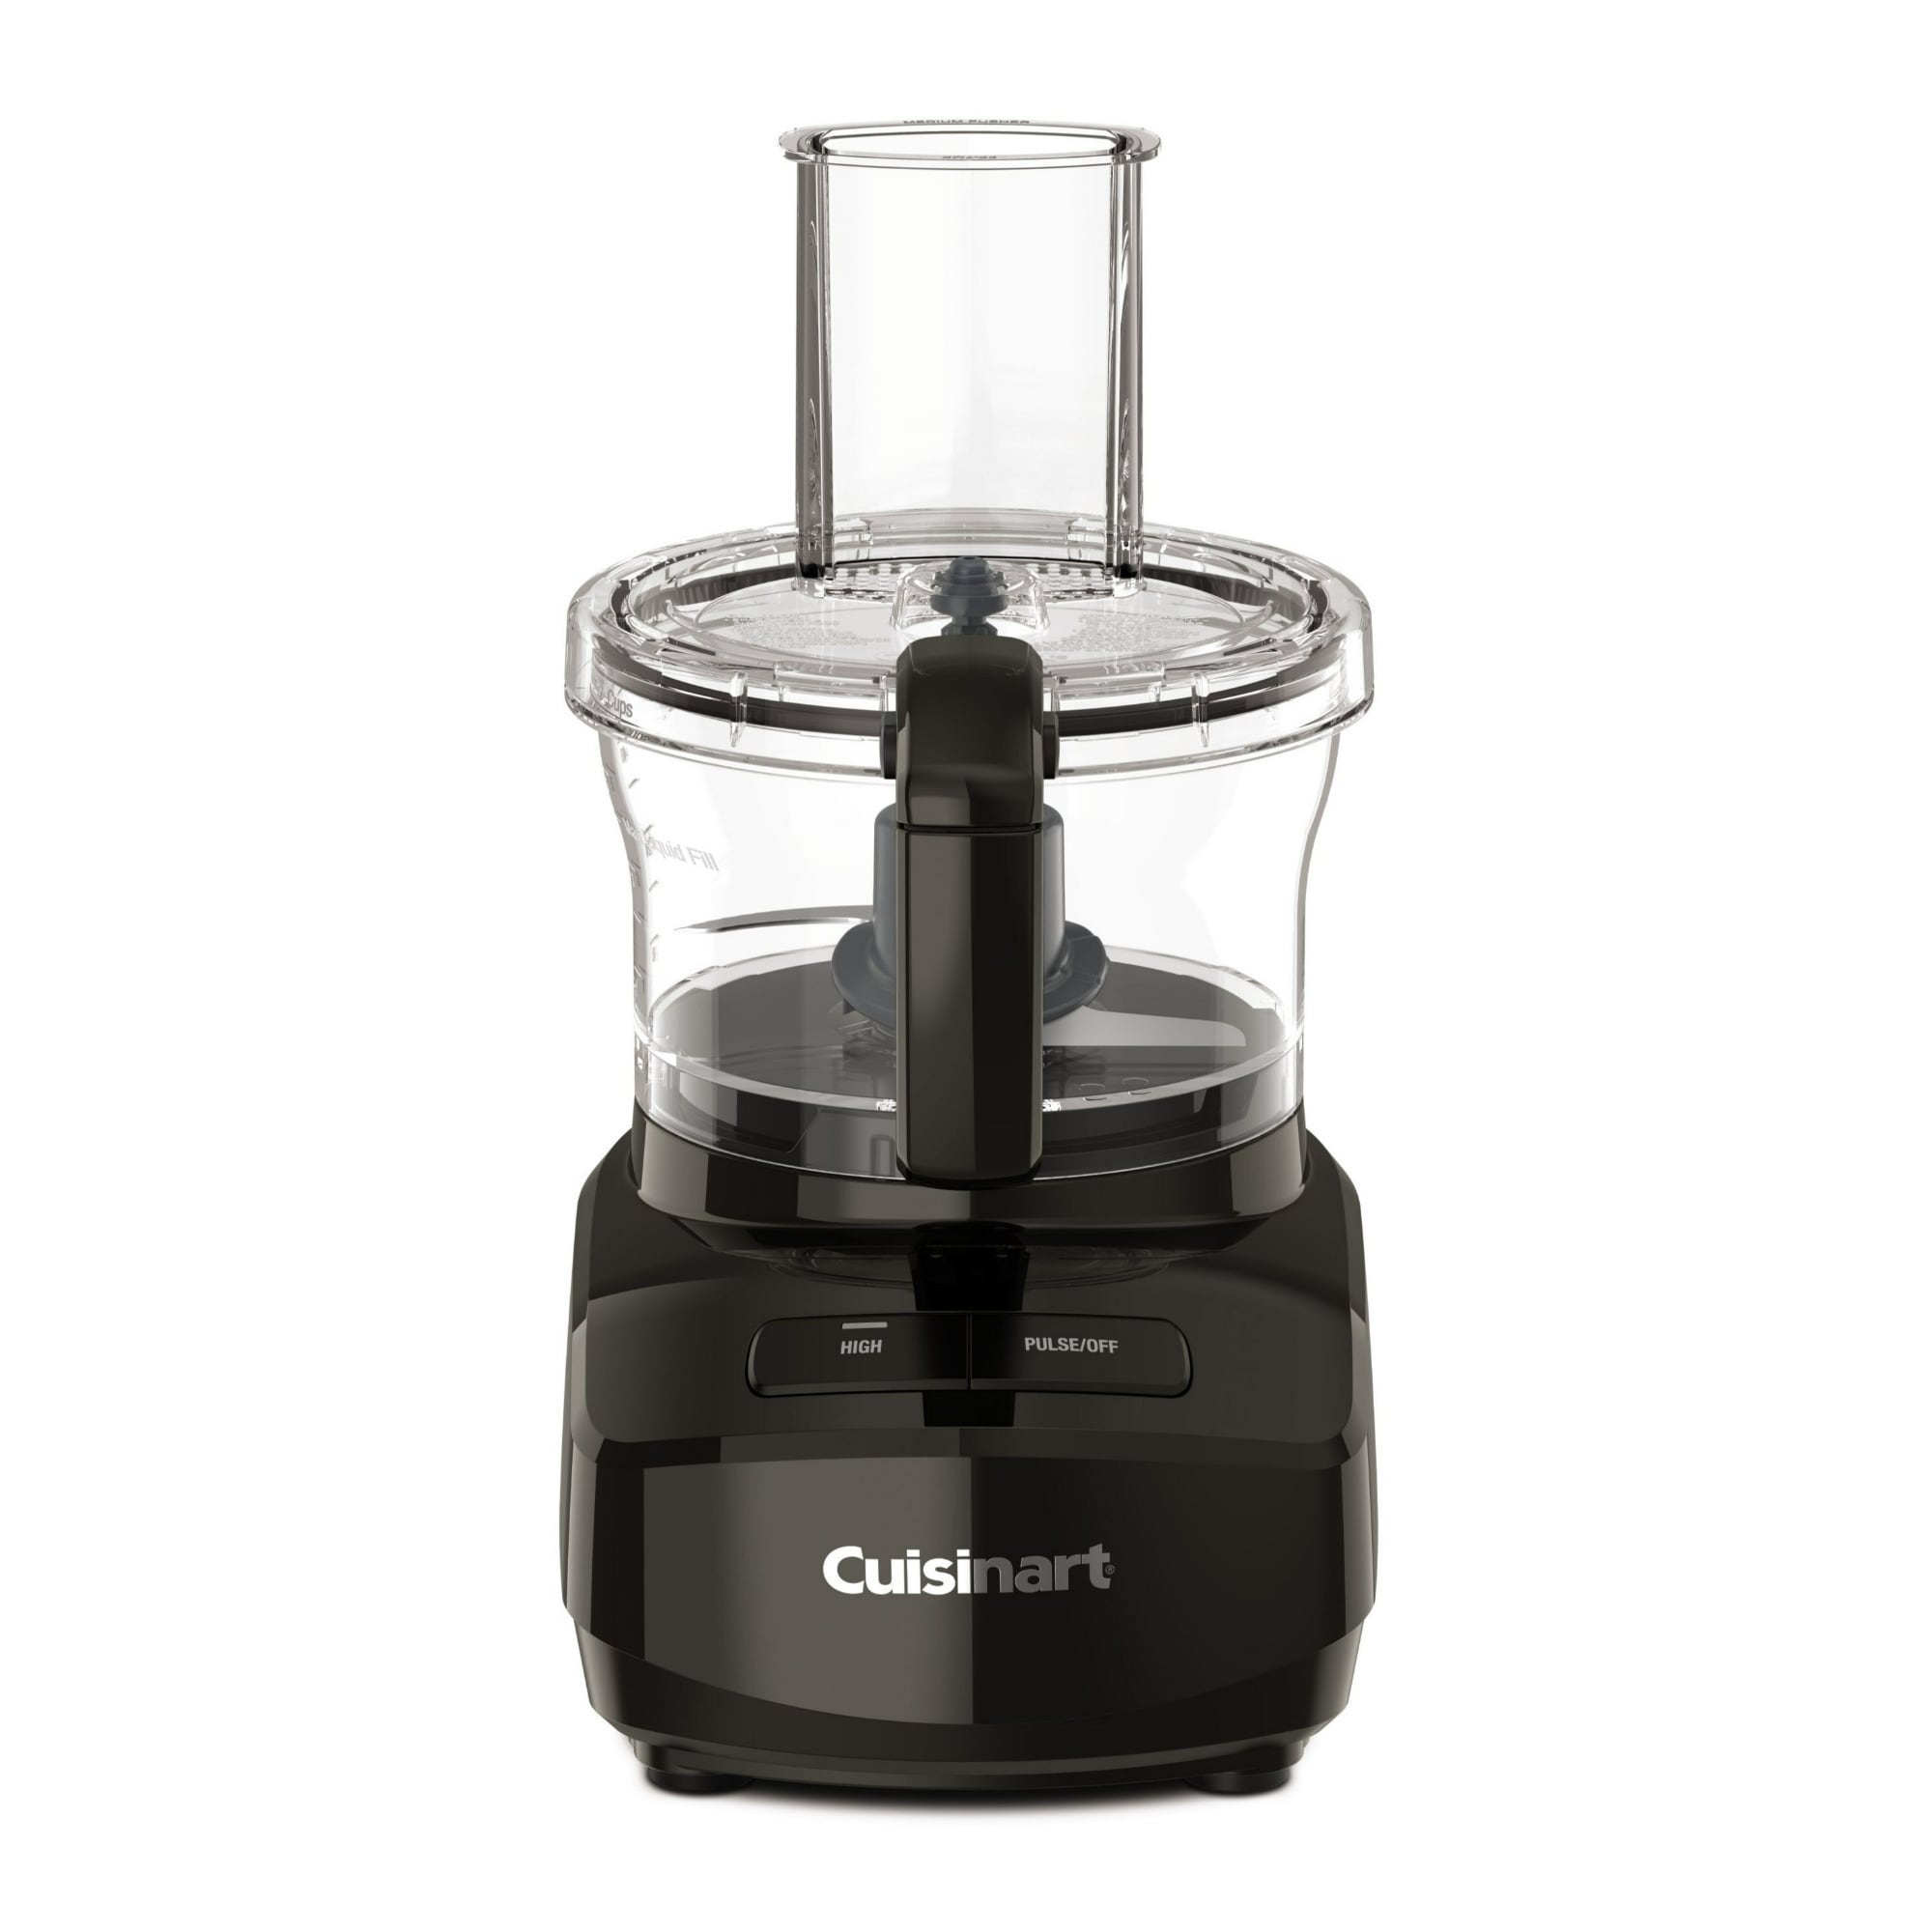 https://ak1.ostkcdn.com/images/products/is/images/direct/561440154b705c2c6eefce316f92c5abb9764233/Cuisinart-7-Cup-Modern-Design-Food-Processor-w--Two-Easy-Controls.jpg